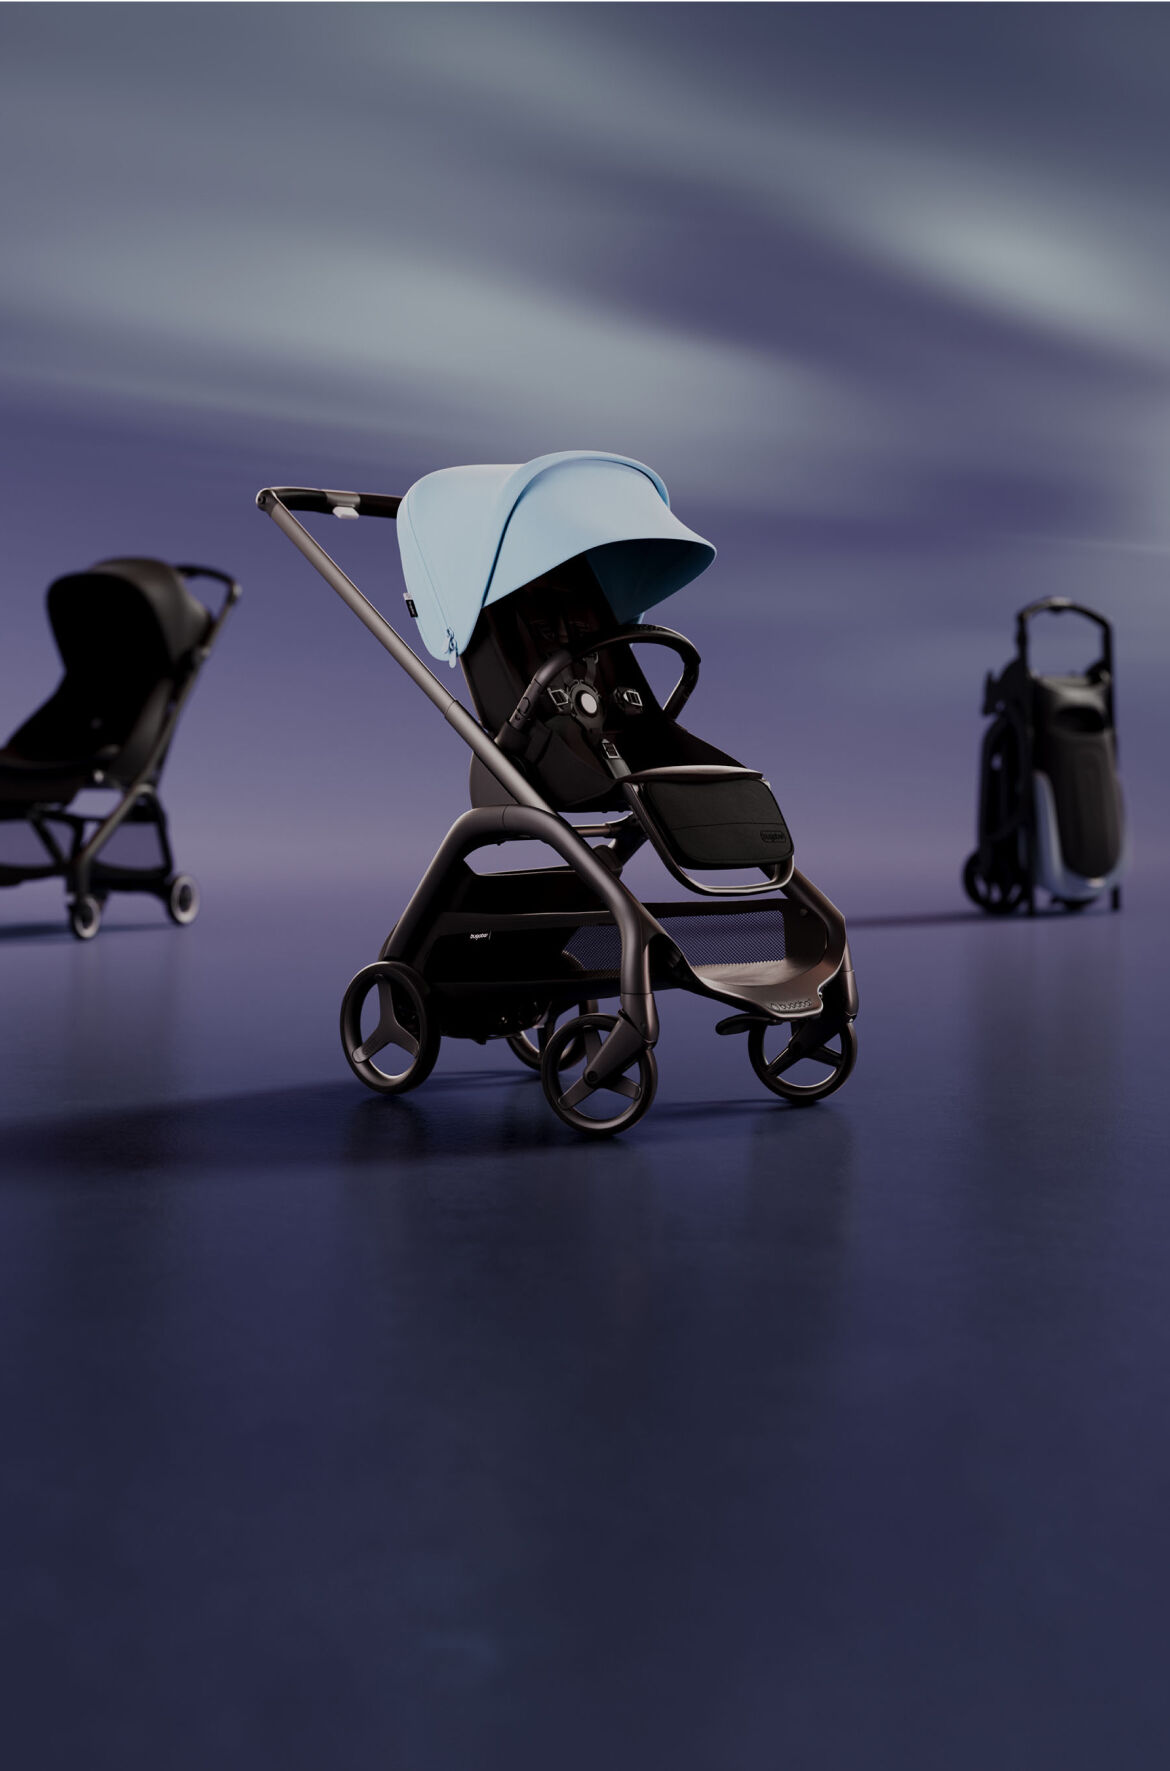 A lineup of 3 strollers. At the front is a Bugaboo Dragonfly with Skyline Blue sun canopy. On the left is a Bugaboo Butterfly with Midnight Black fabrics. On the right is a self-standing folded Bugaboo Dragonfly.